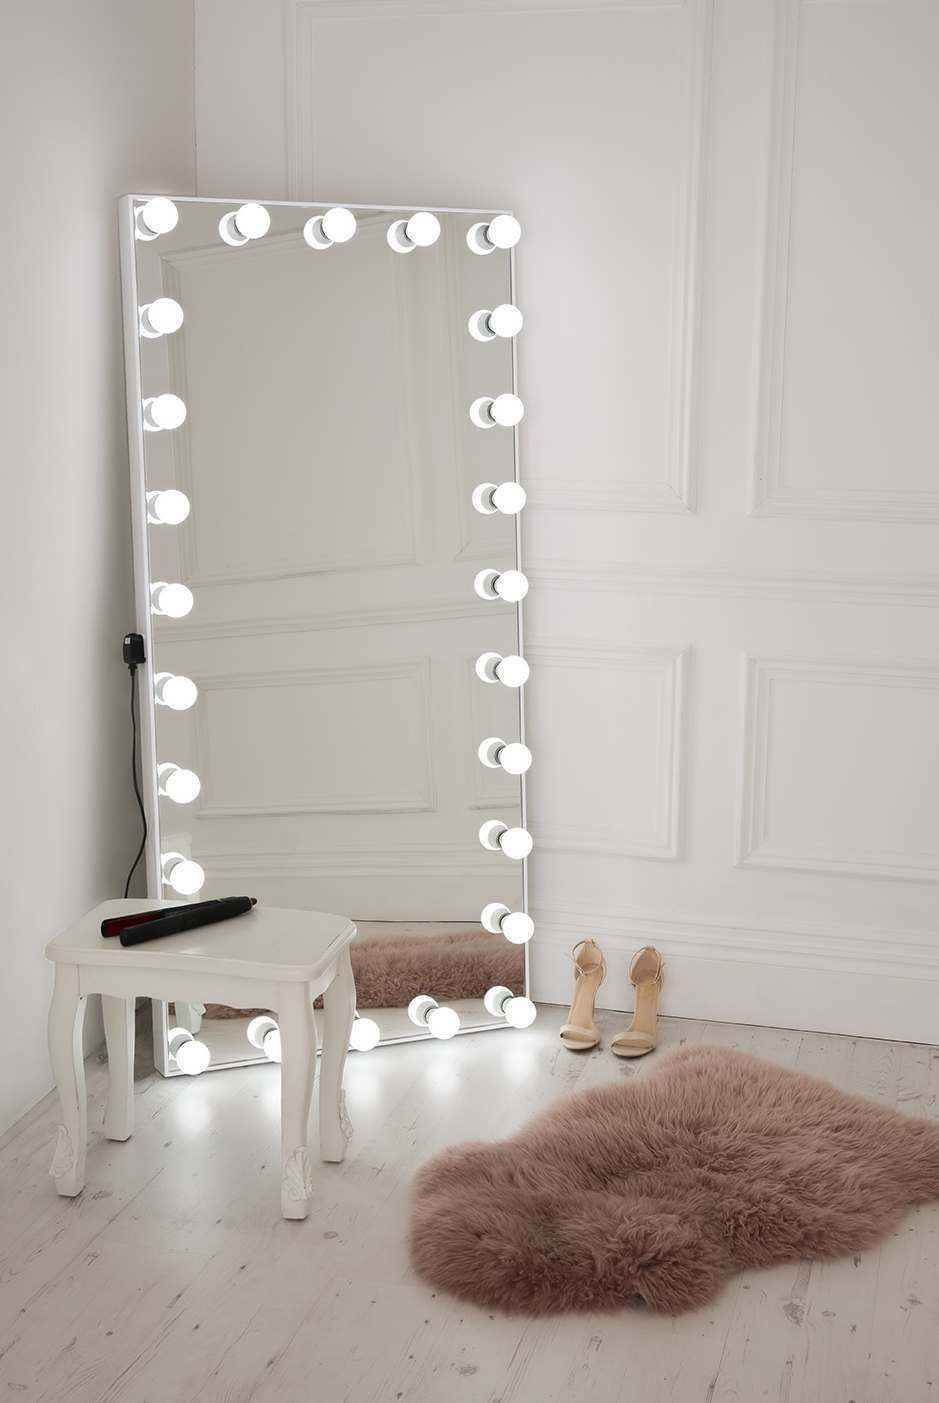 Bedroom Mirror With Lights
 Ultimate Selfie Free Standing Full Length Illuminated